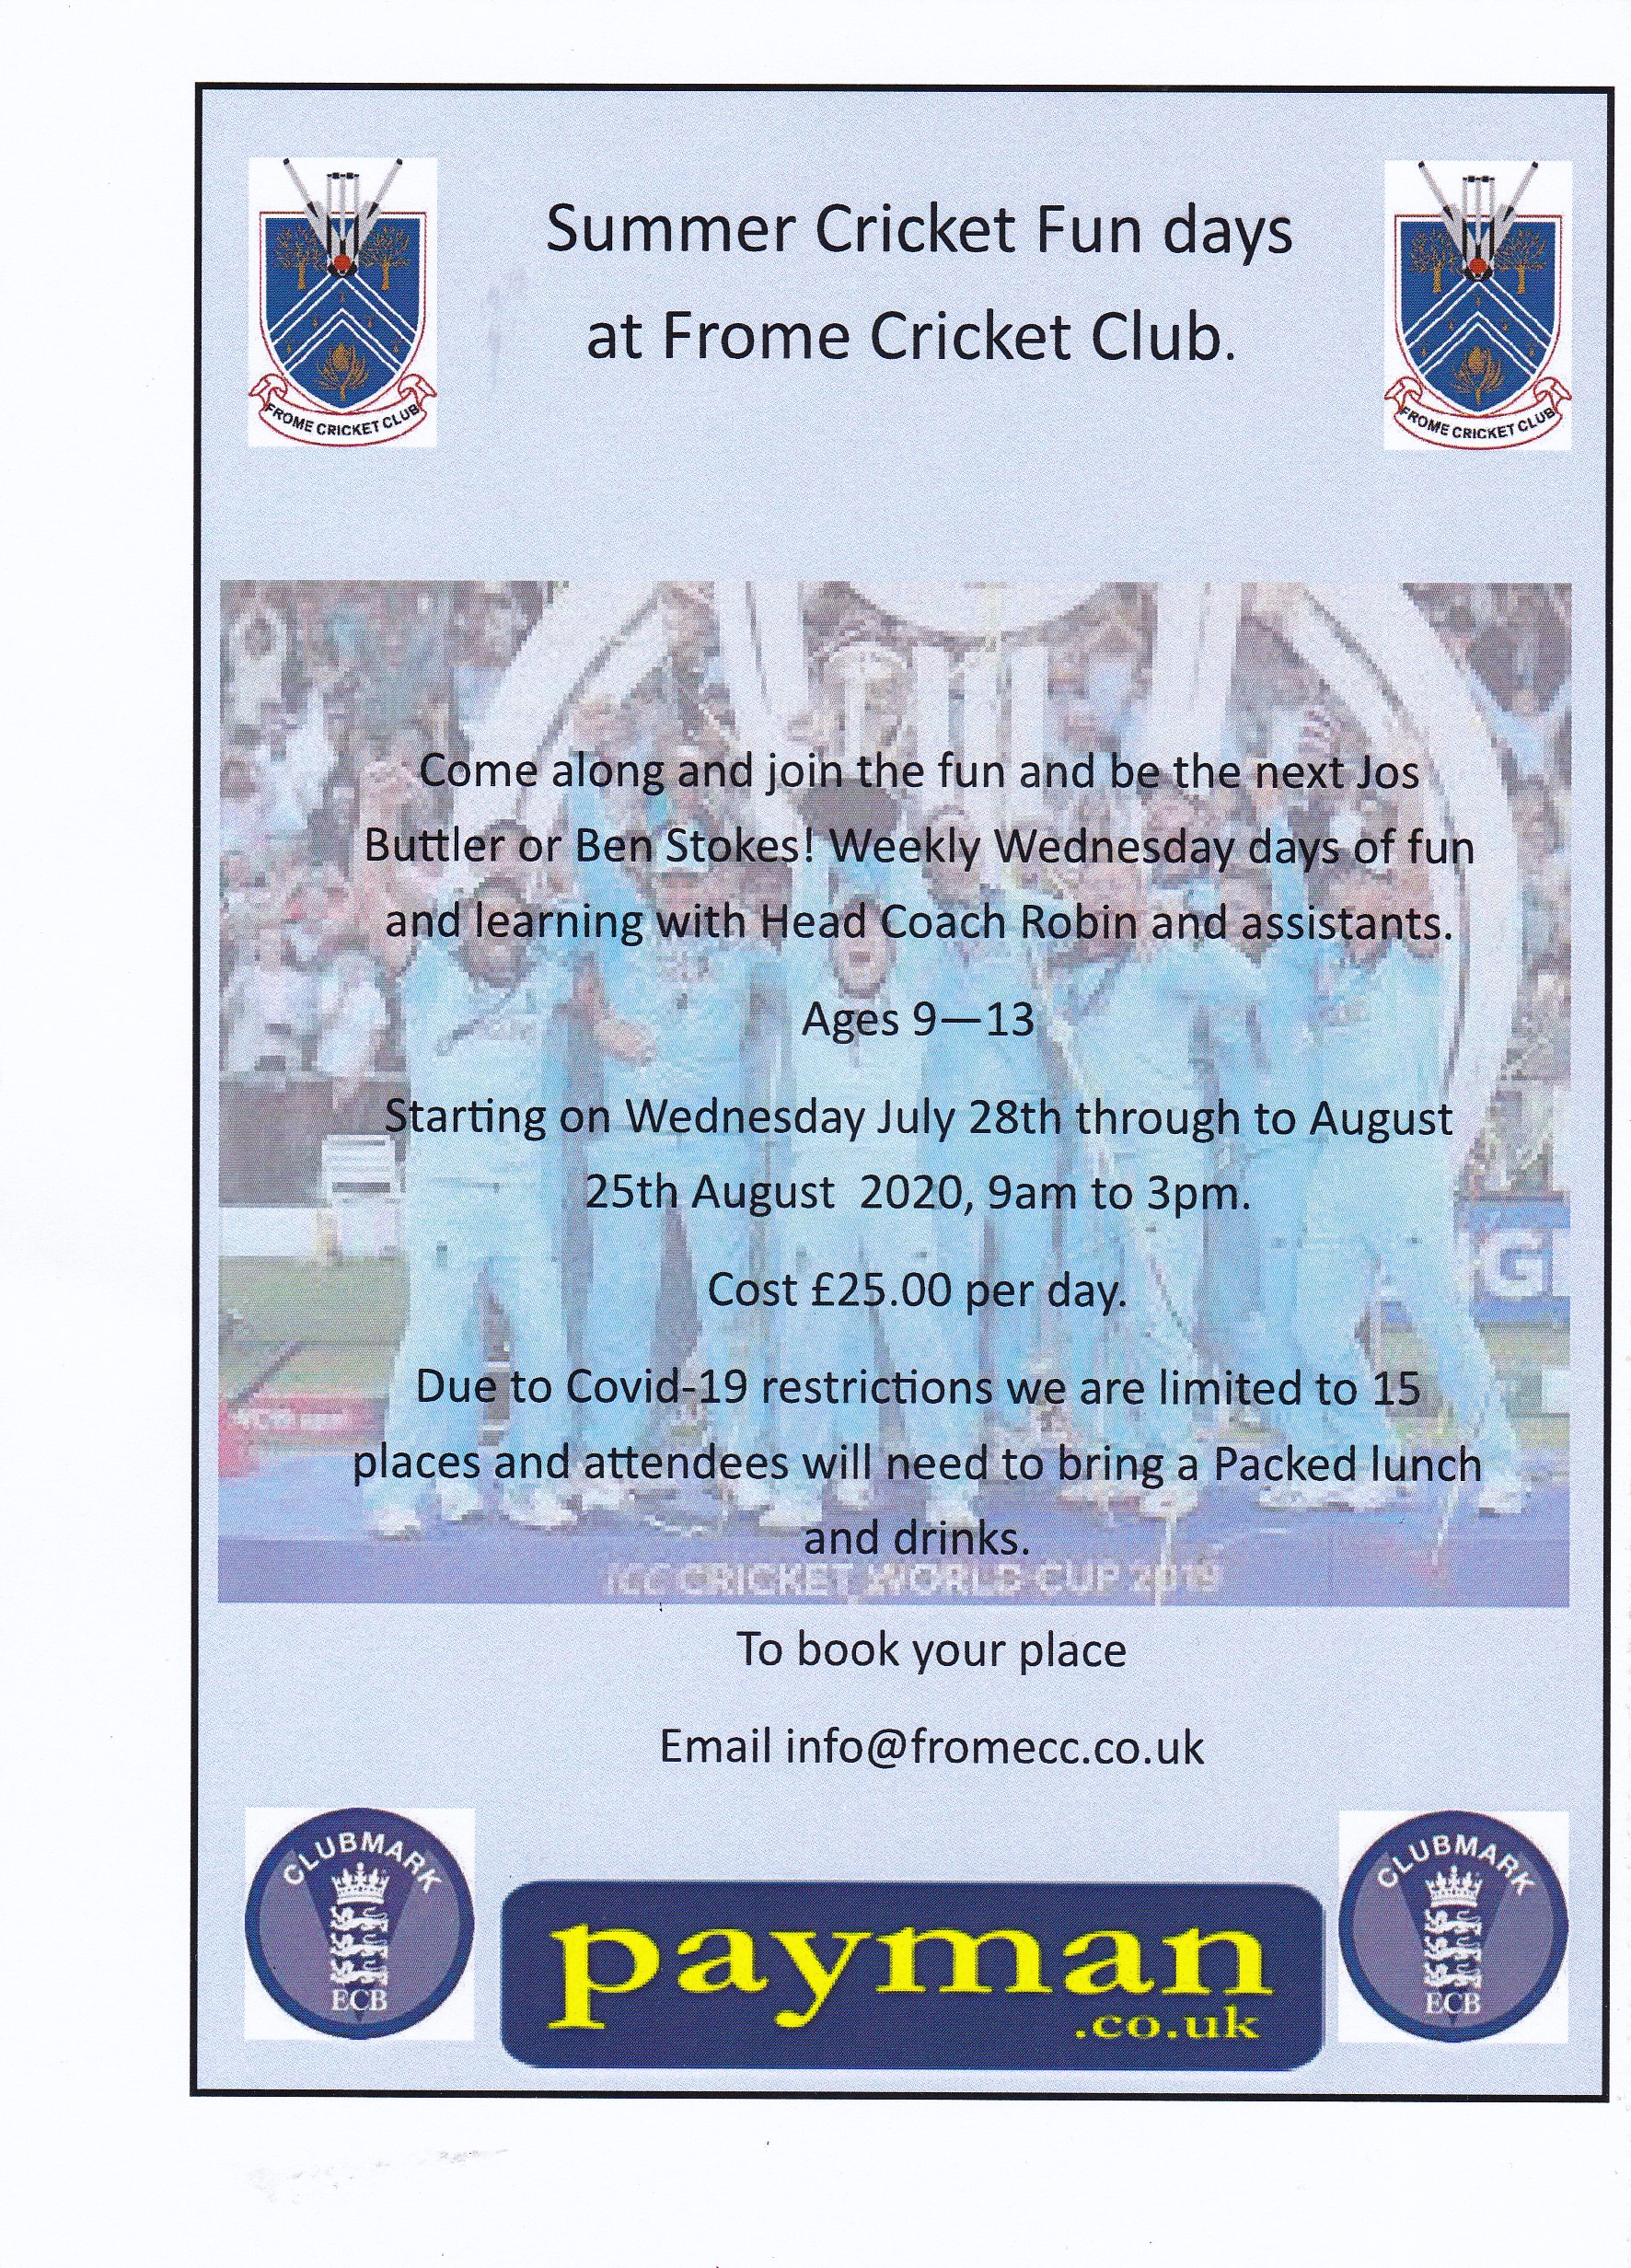 Summer Cricket fun days at Frome Cricket Club